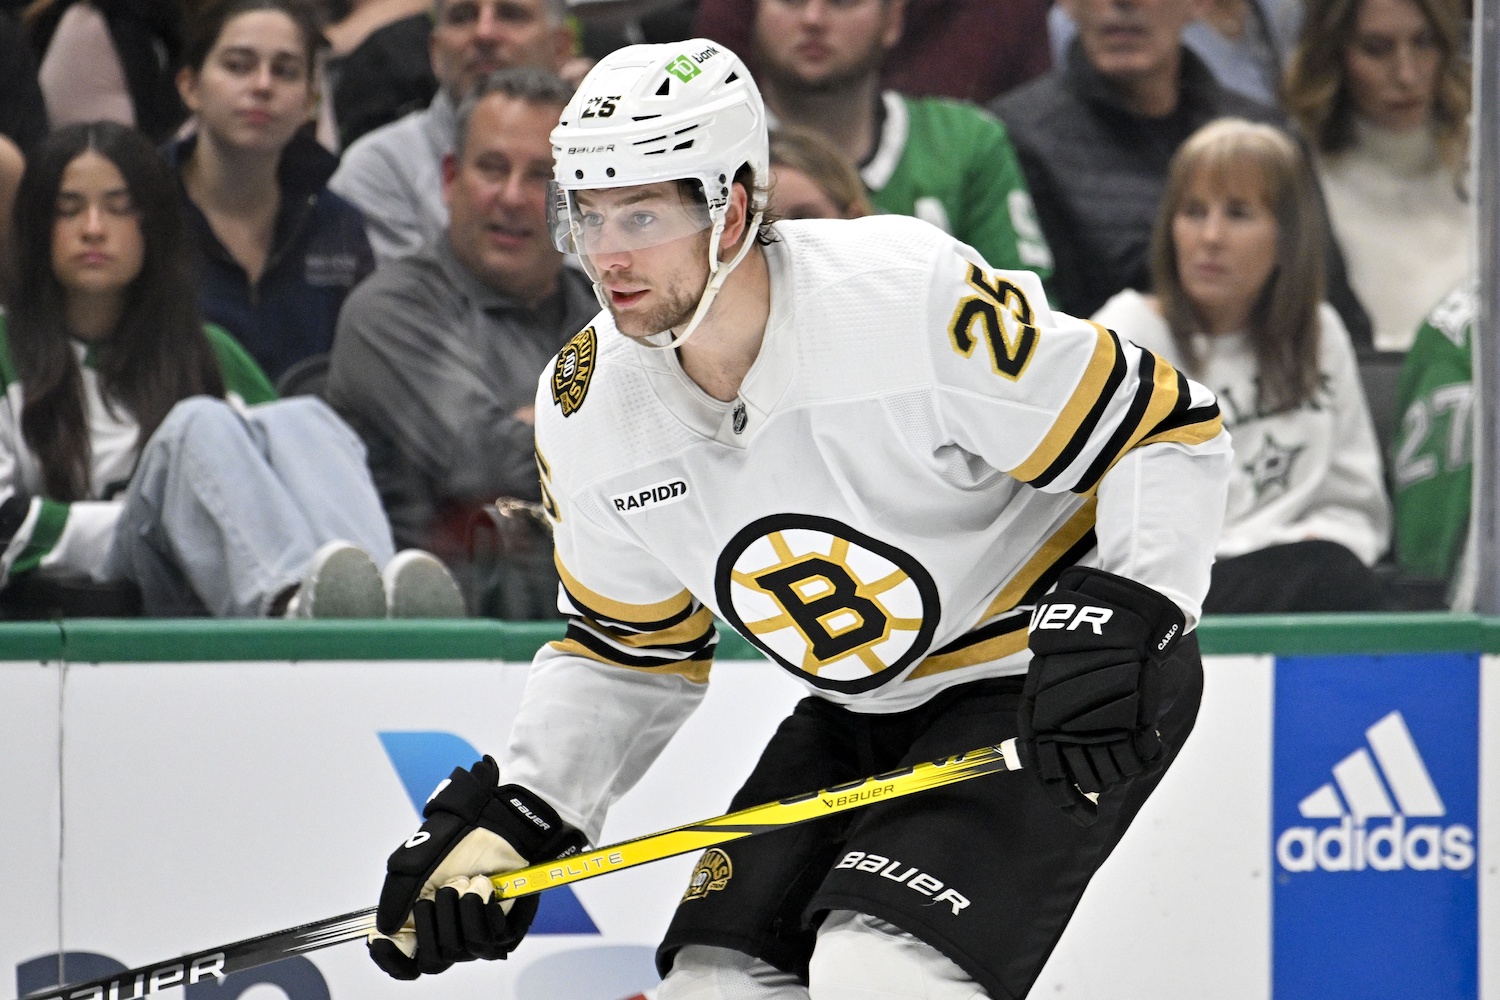 Nov 6, 2023; Dallas, Texas, USA; Boston Bruins defenseman Brandon Carlo (25) in action during the game between the Dallas Stars and the Boston Bruins at the American Airlines Center. Mandatory Credit: Jerome Miron-USA TODAY Sports